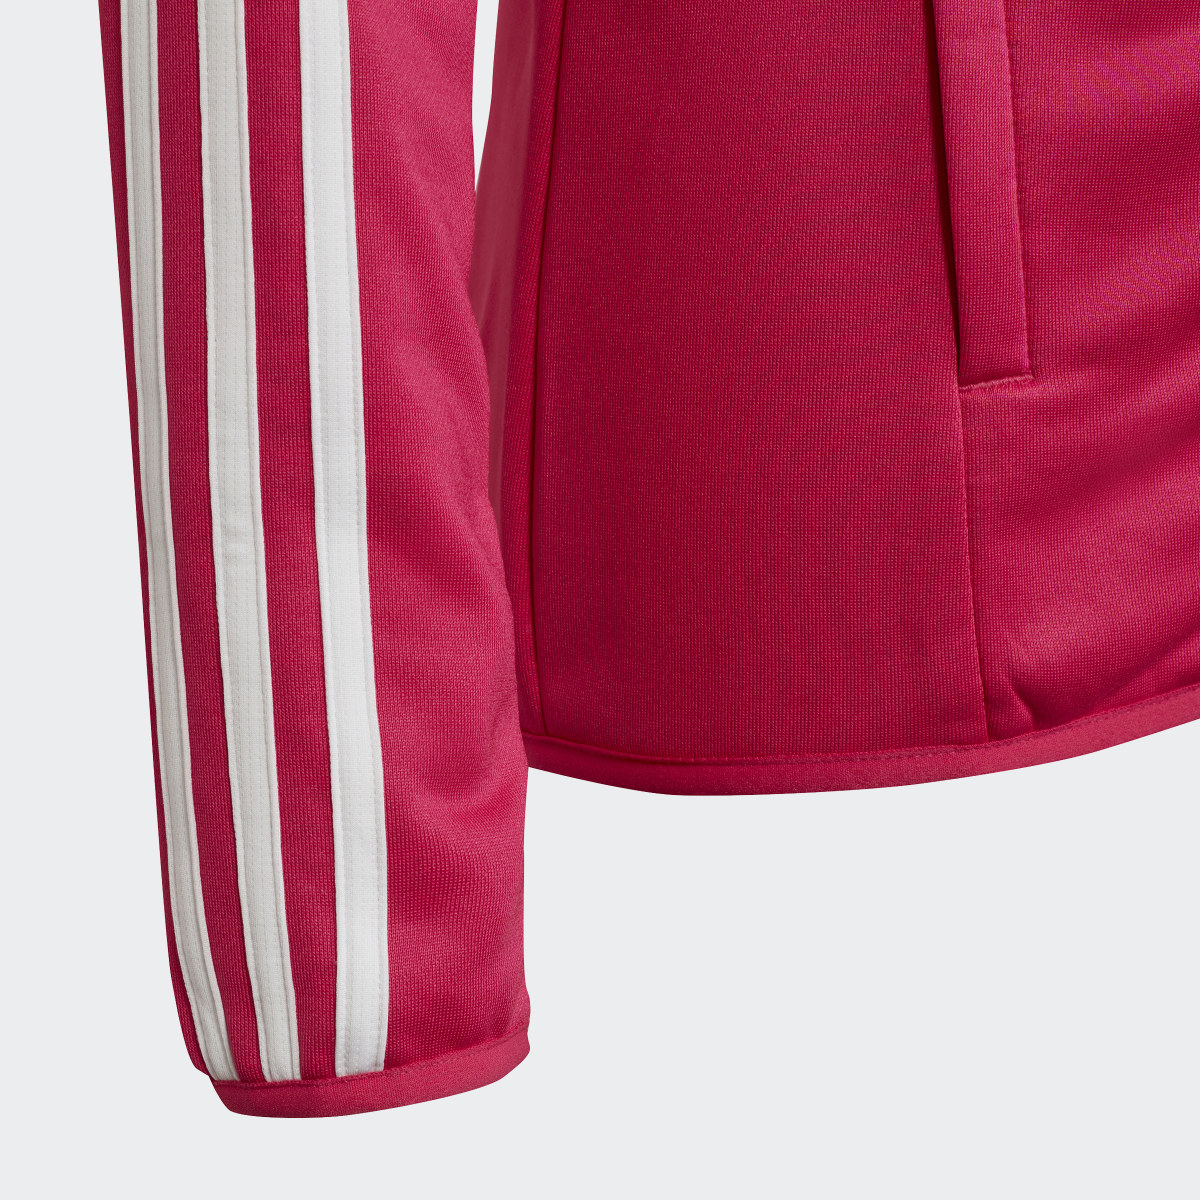 Adidas Designed To Move 3-Stripes Full-Zip Hoodie. 4